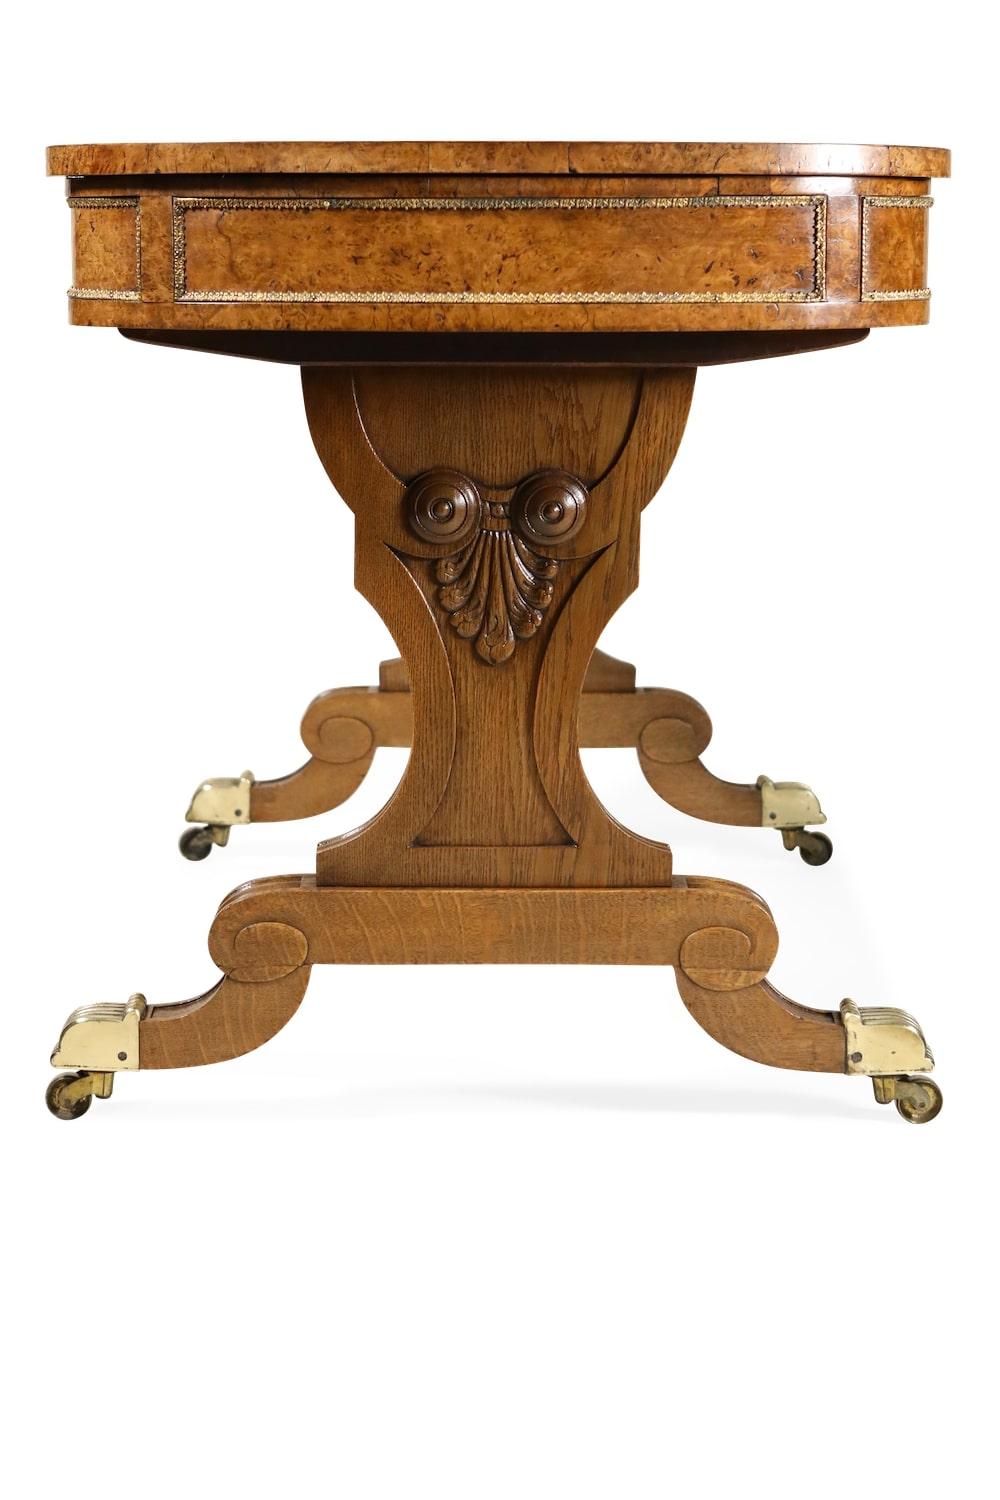 An unusual early 19th century brass-mounted pollard oak writing table, attributed to Gillows, the hinged rectangular leather-inset writing top with an adjustable writing slope on a ratchet flanked by semi-circular ends, the frieze with one long